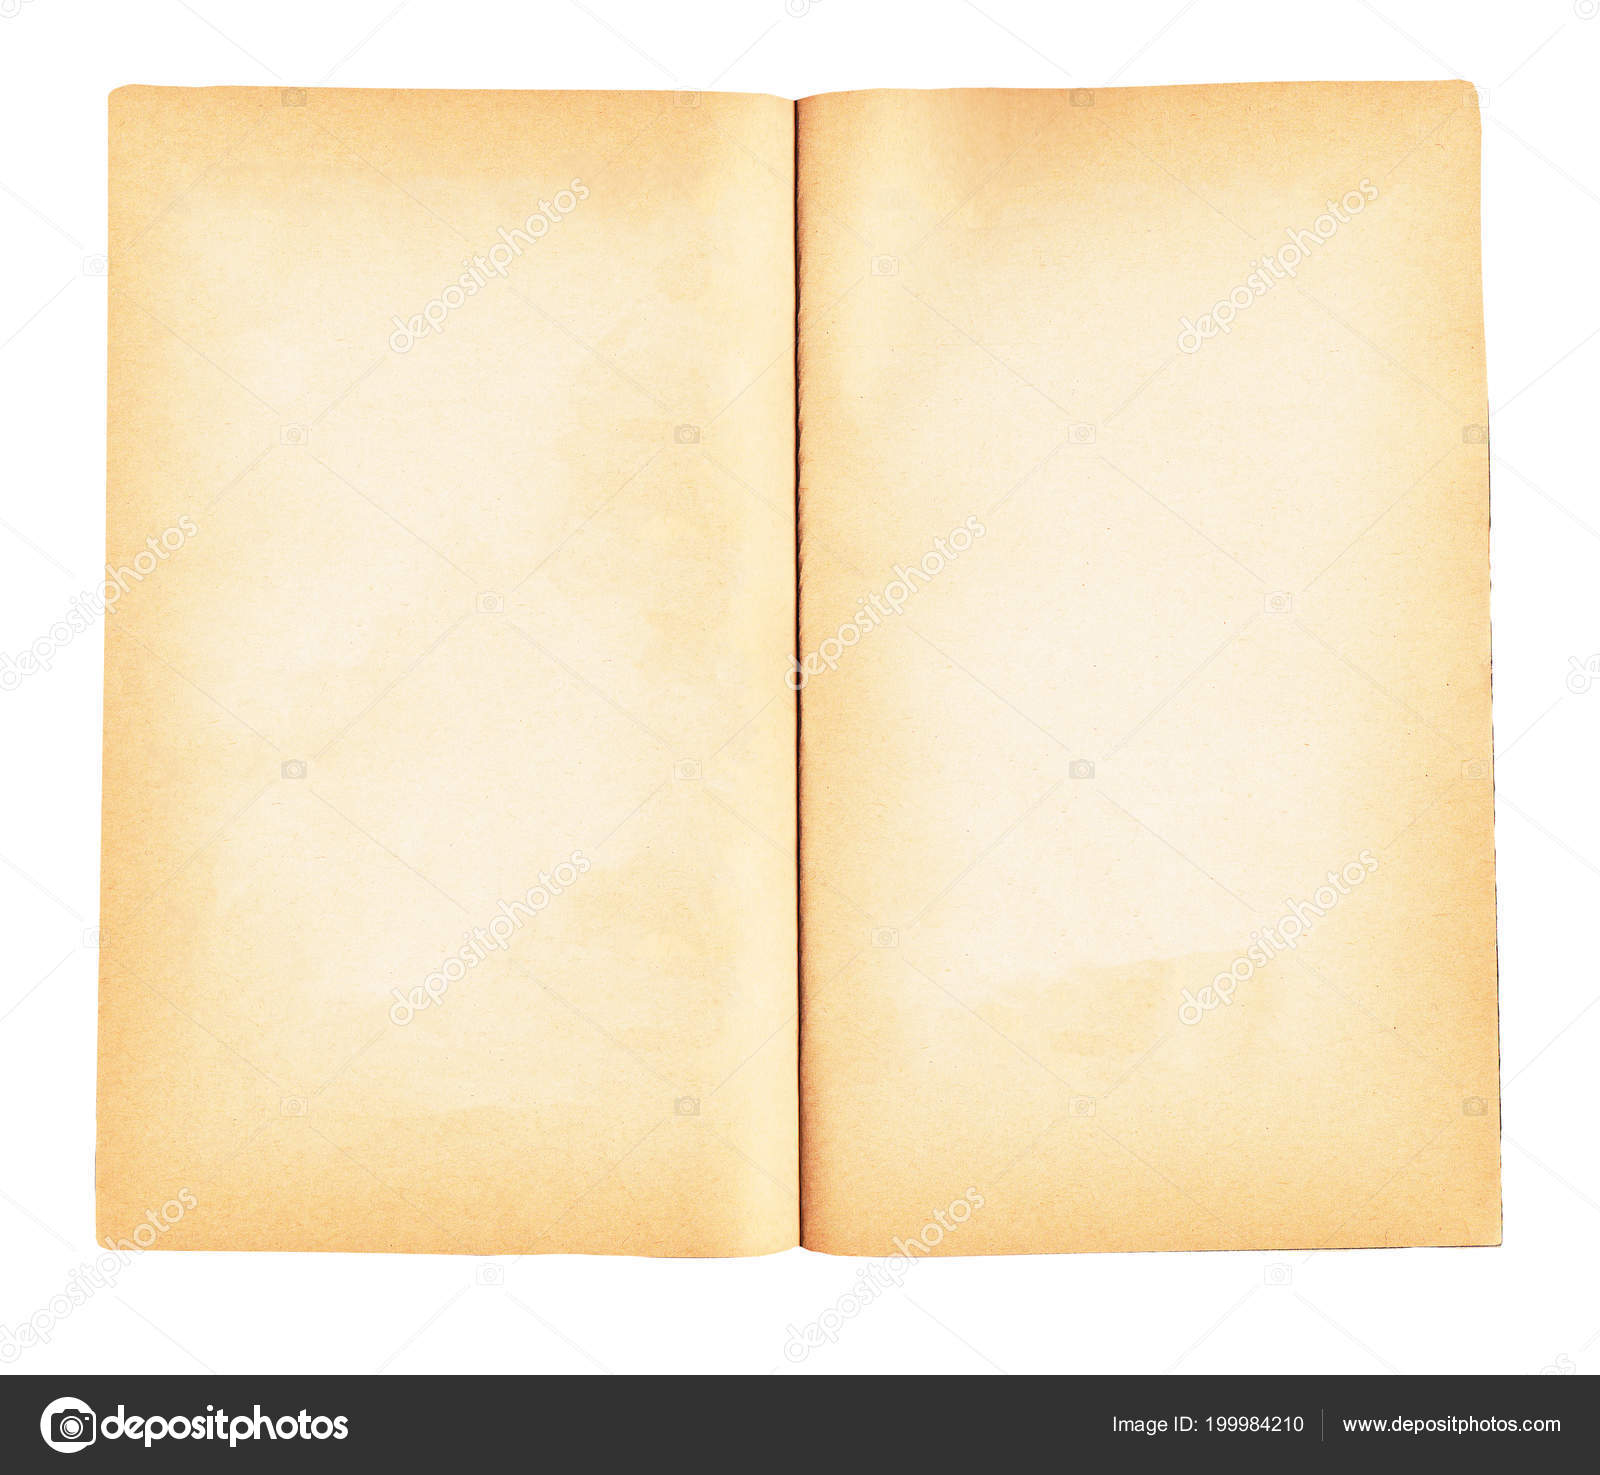 Old Open Books Digital Vintage Antique PNG Images of Blank Book Pages  Instant Download for Commercial Use 